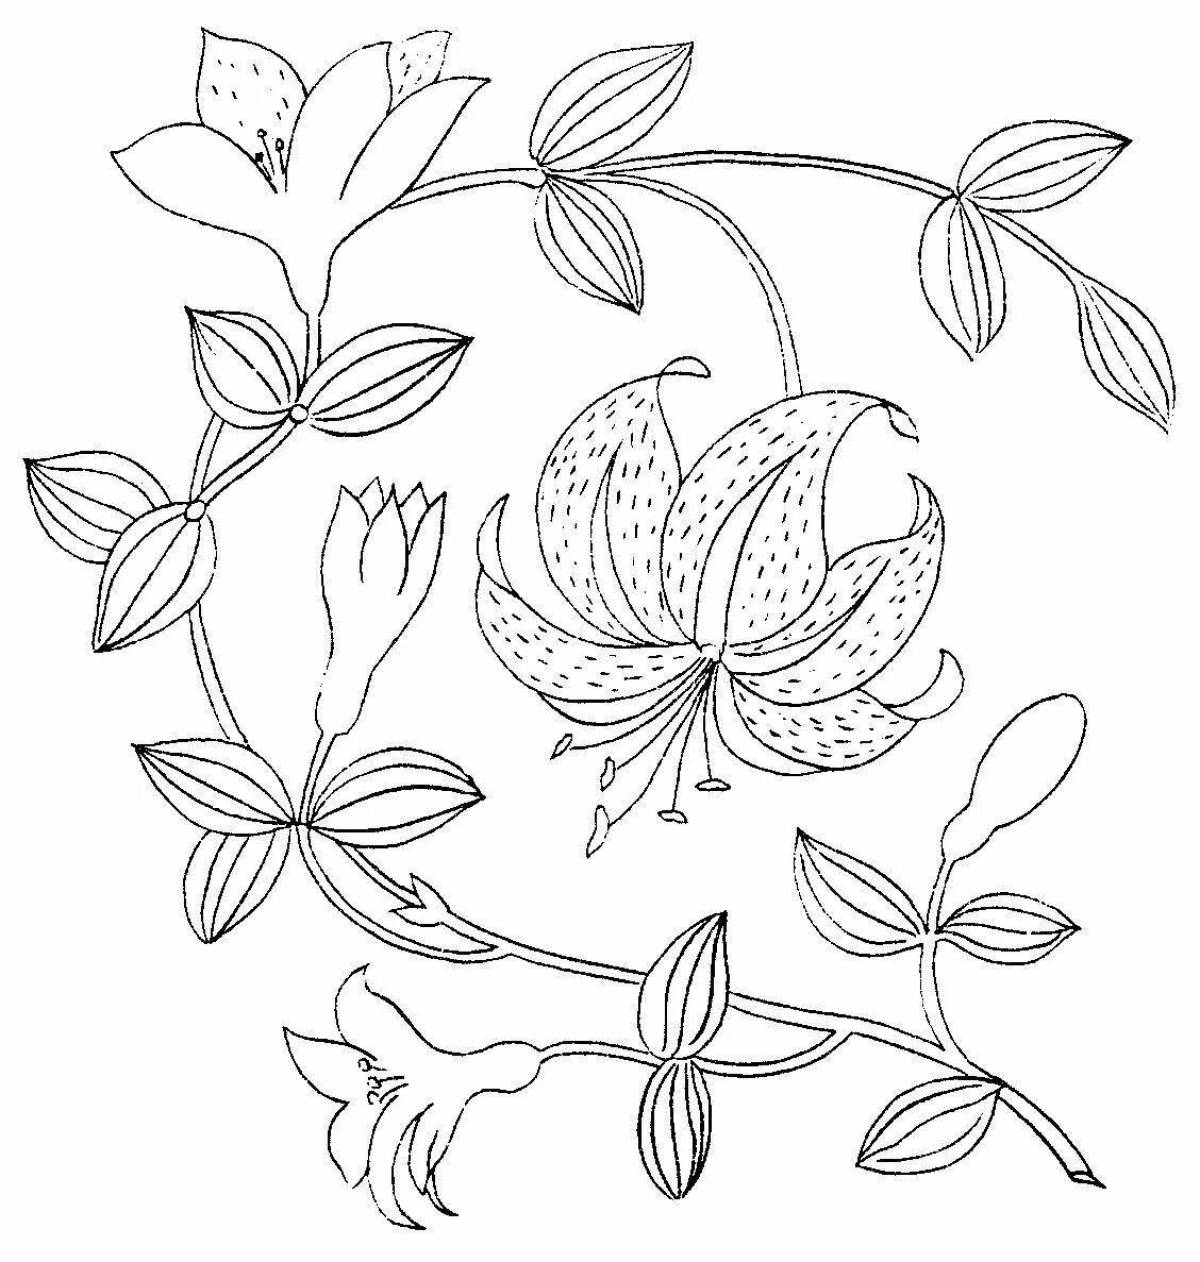 Coloring book exotic flower ornament